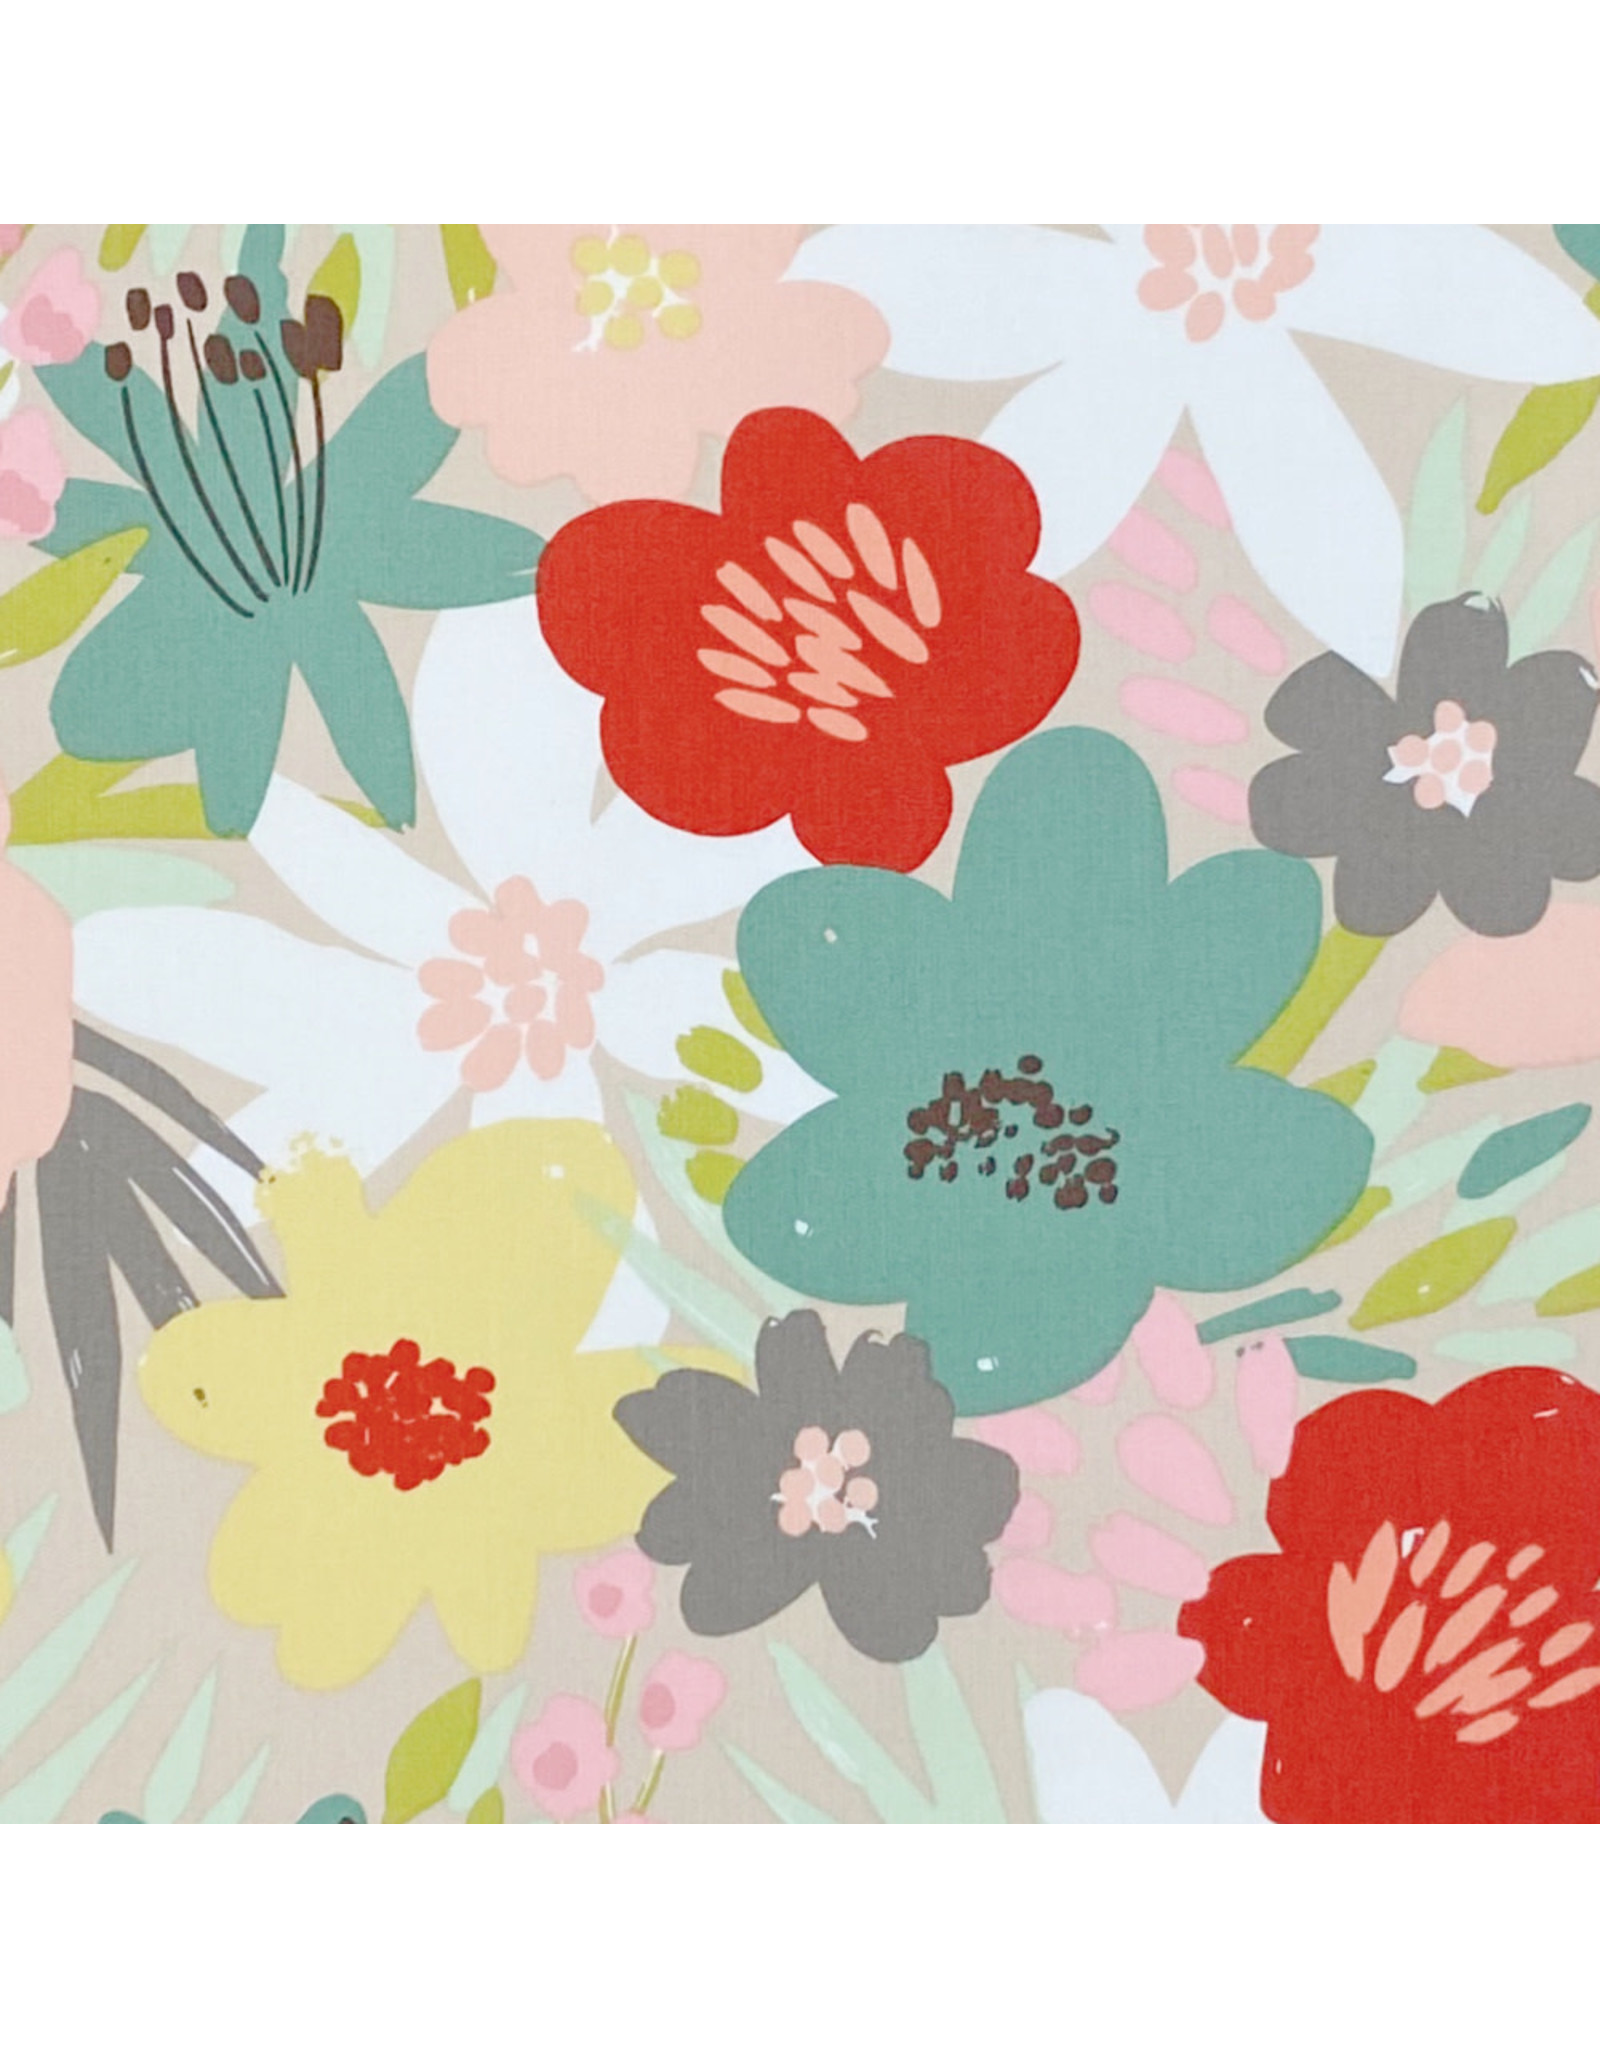 Alexander Henry Fabrics Wish You Were Here, Bouquet in Grey Pink, Fabric Half-Yards